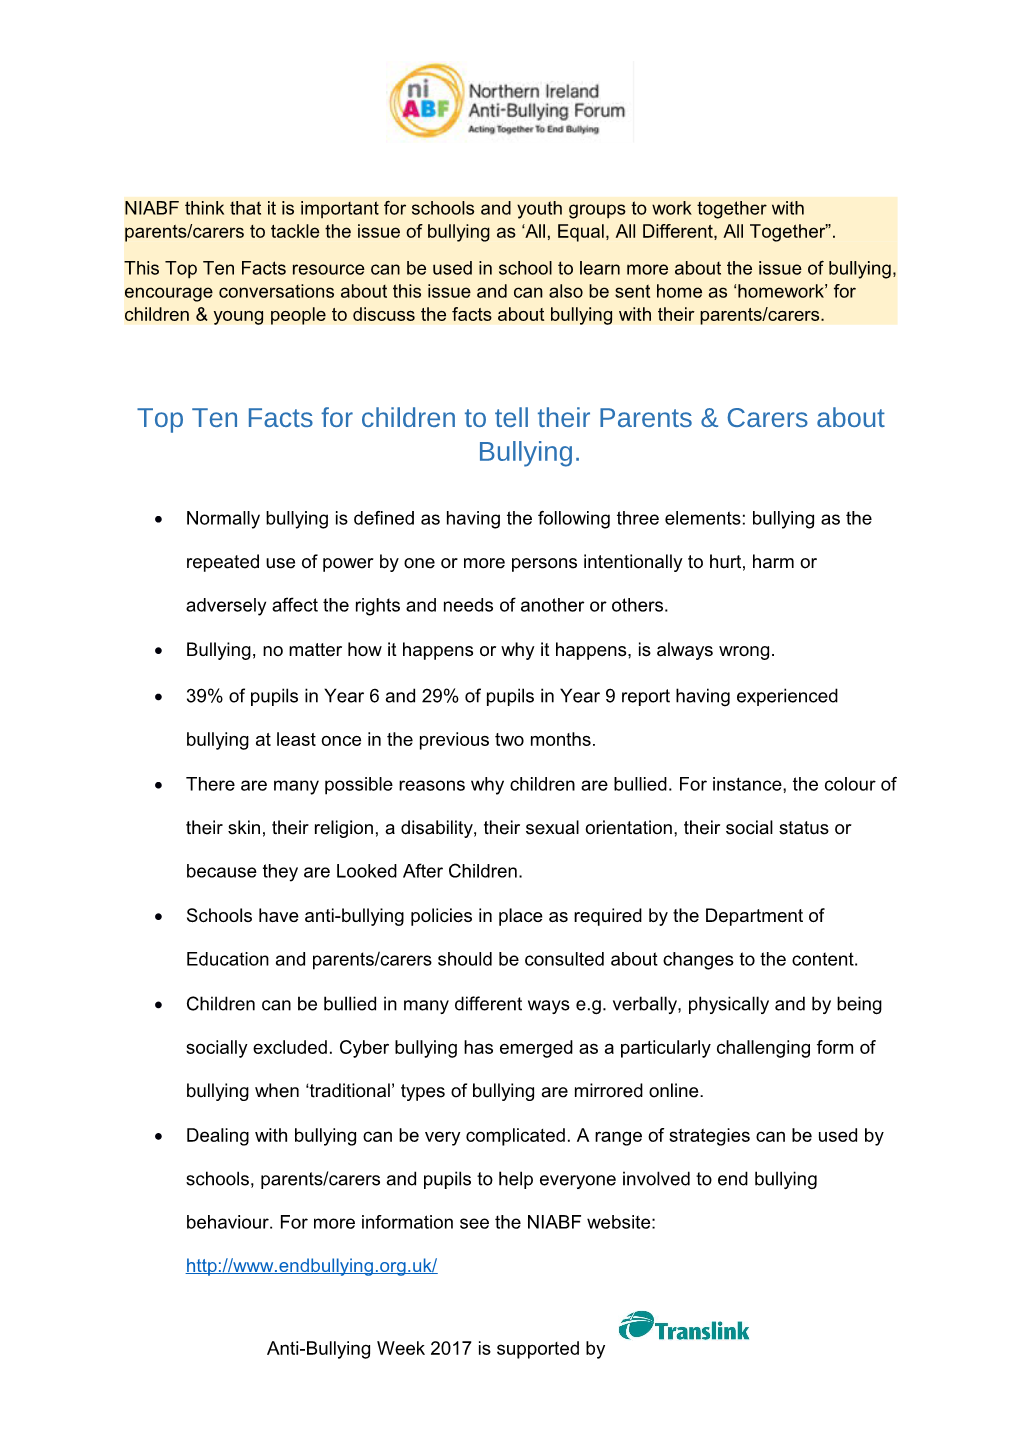 Top Ten Facts for Children to Tell Their Parents & Carers About Bullying